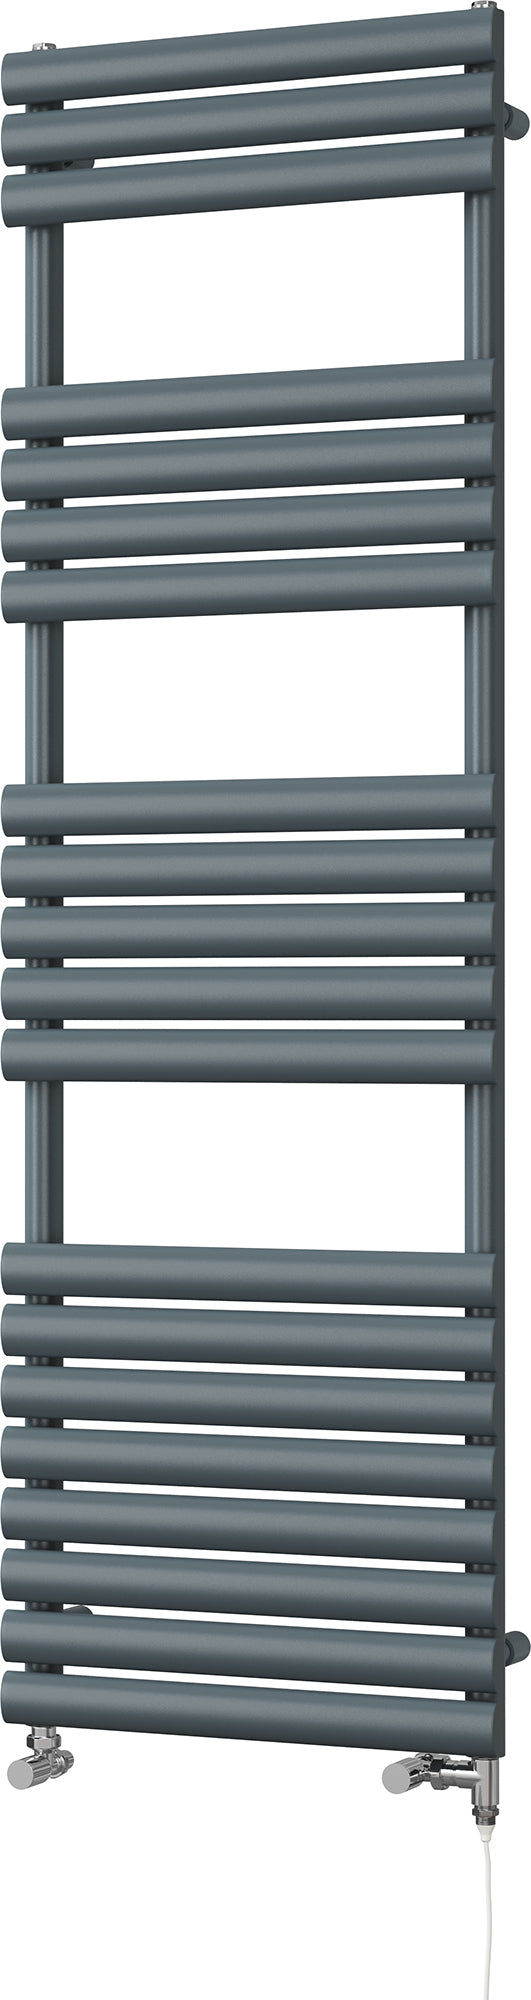 Omeara - Anthracite Dual Fuel Towel Rail H1595mm x W500mm Standard